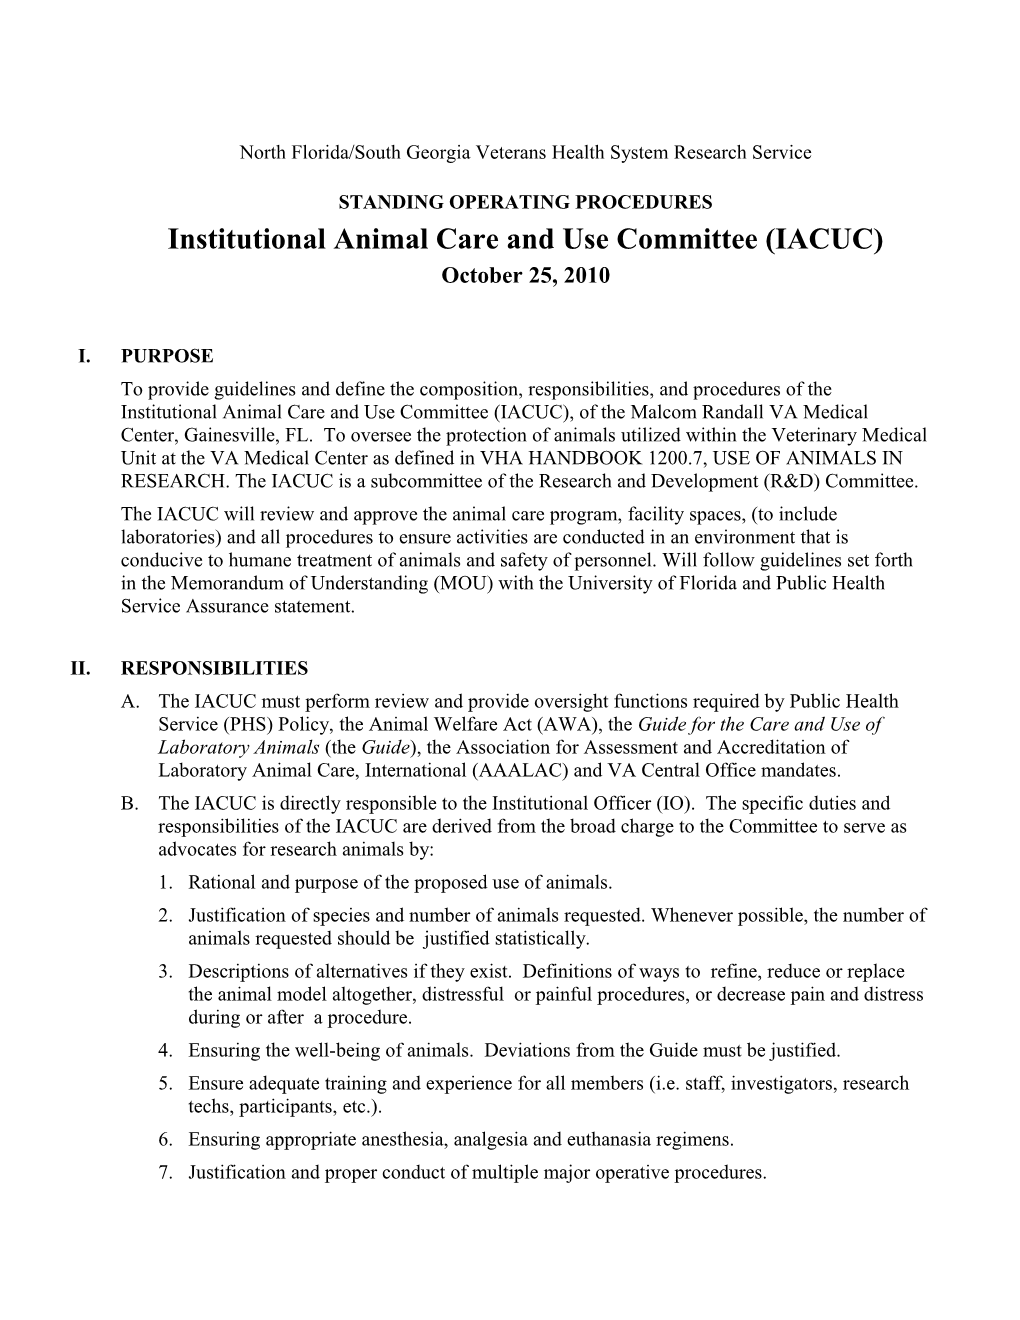 Institutional Animal Care and Use Committee Standard Operating Procedure